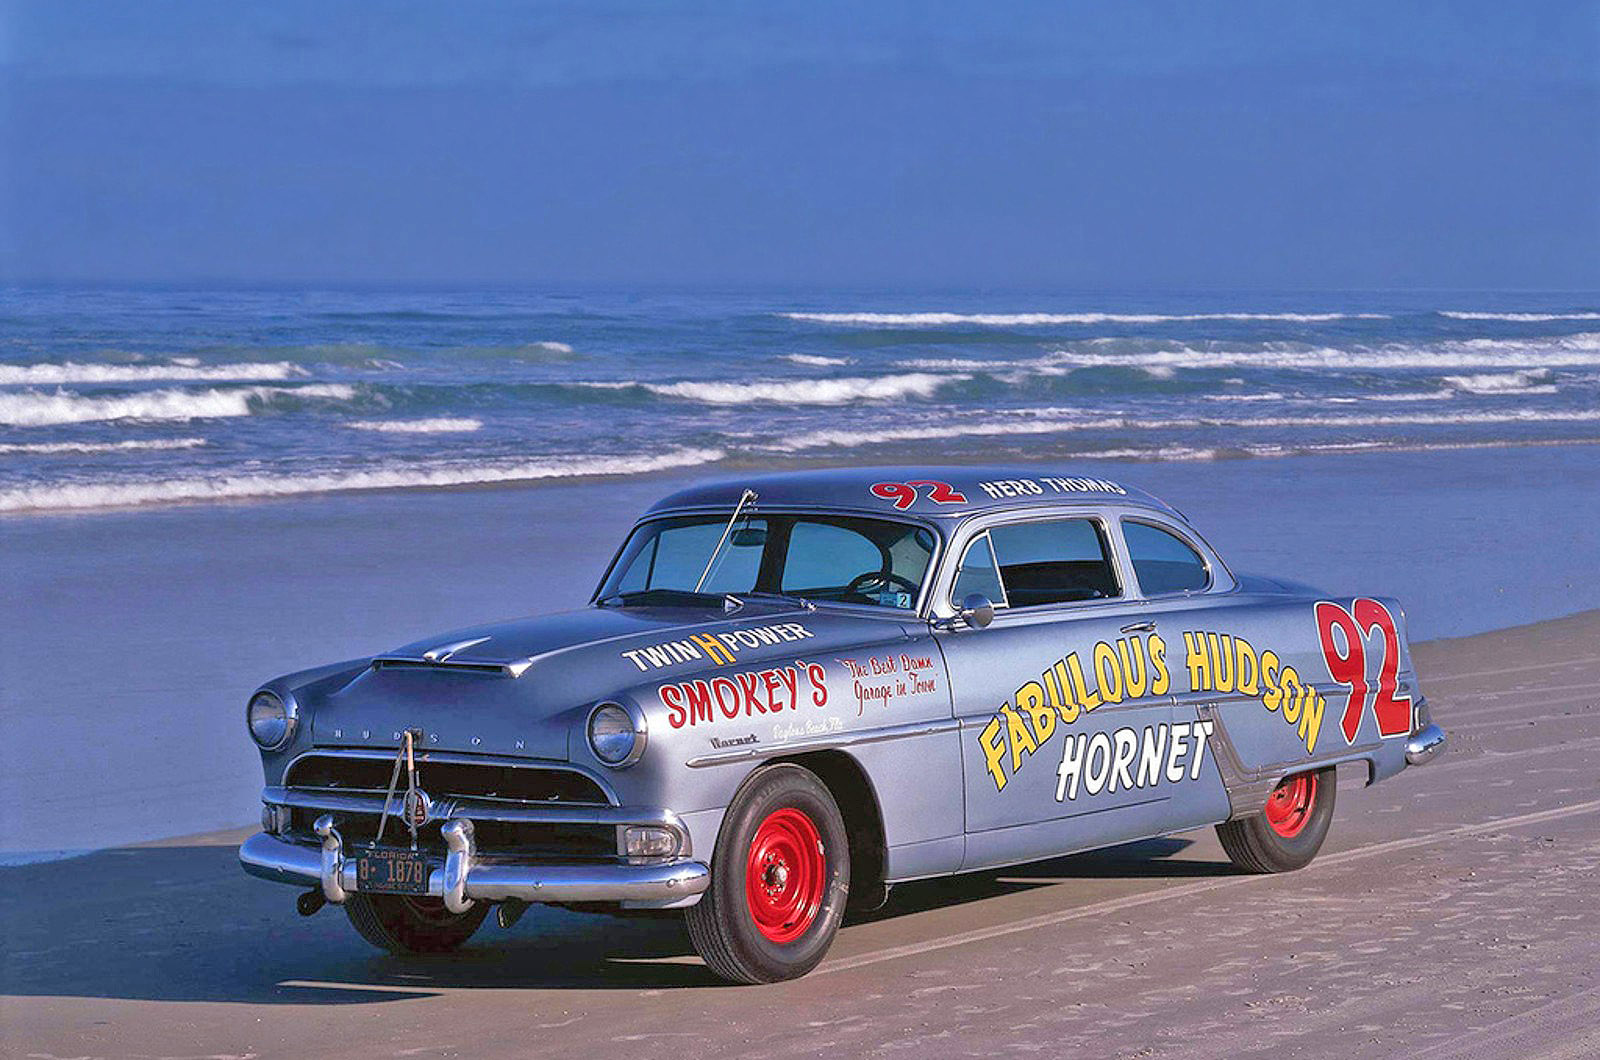 <p>This renowned stock car saw significant success in NASCAR Grand National Series and AAA races in the early 1950s. The Hudson Hornet gave rise to the “Win on Sunday, sell on Monday” adage, reflecting the powerful influence racing success had on car sales.</p><p>1952 was Hudson’s most successful year in NASCAR, achieving 27 victories out of 34 races— a staggering win rate of 79.4%. Interest in the car spiked once again in 2006, after it was immortalized as the character “Doc Hudson” in Disney Pixar’s <em>Cars.</em></p>